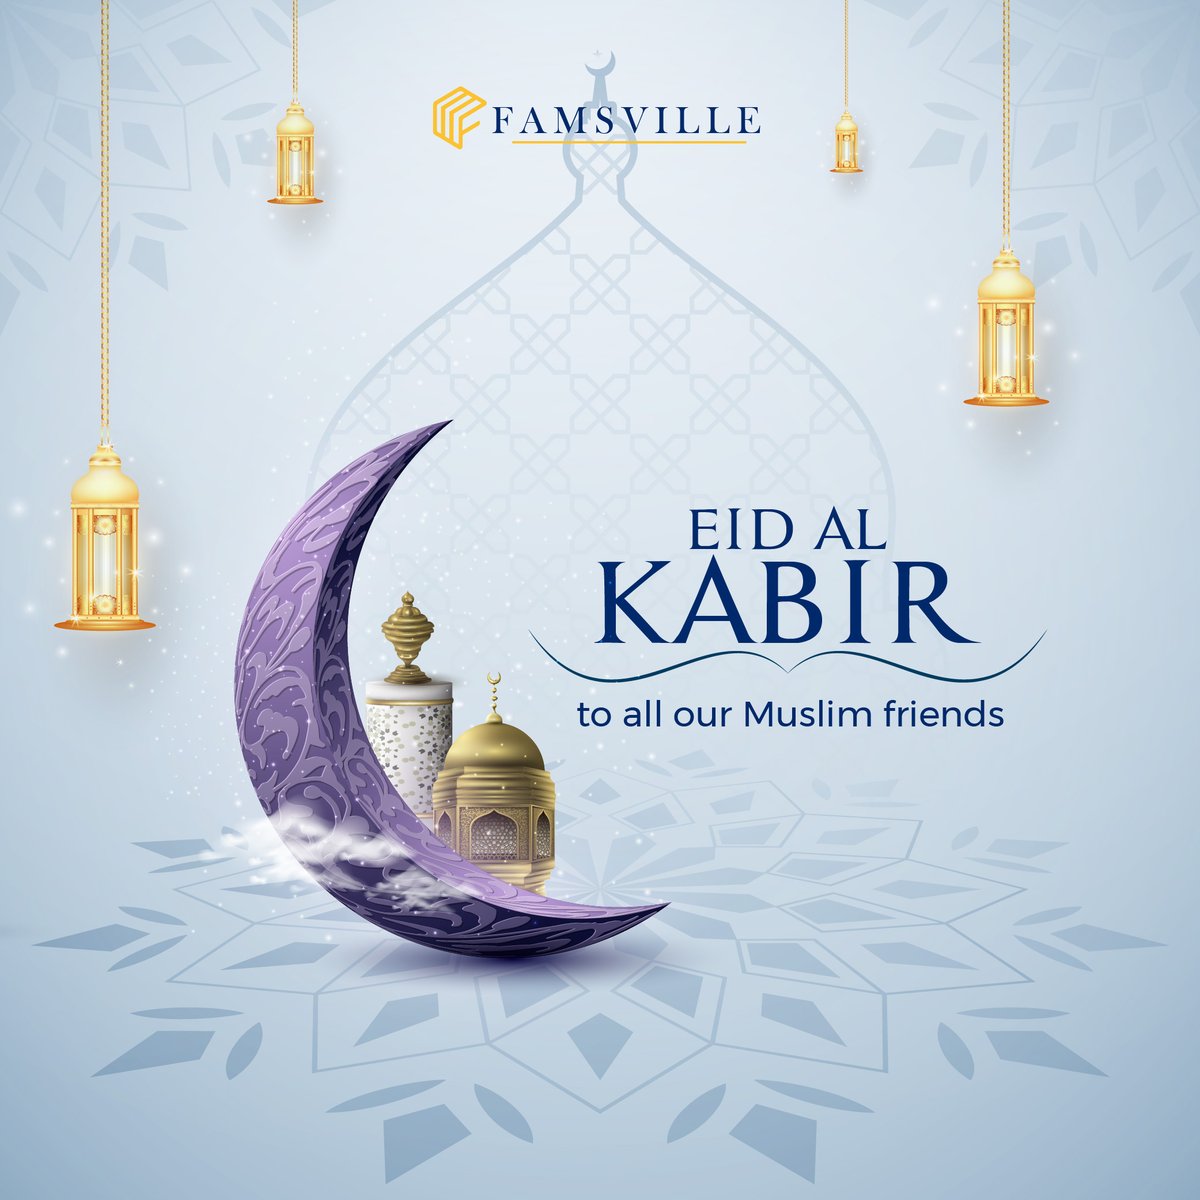 To our Muslim brothers and sisters, we wish you a heartfelt Eid Mubarak! May our prayers be answered, our sacrifices be rewarded, and our homes be filled with peace and happiness.

#Famsville #EidAlKabir #FeastOfSacrifice #EidMubarak #JoyousCelebration #Panafrican #lawfirm